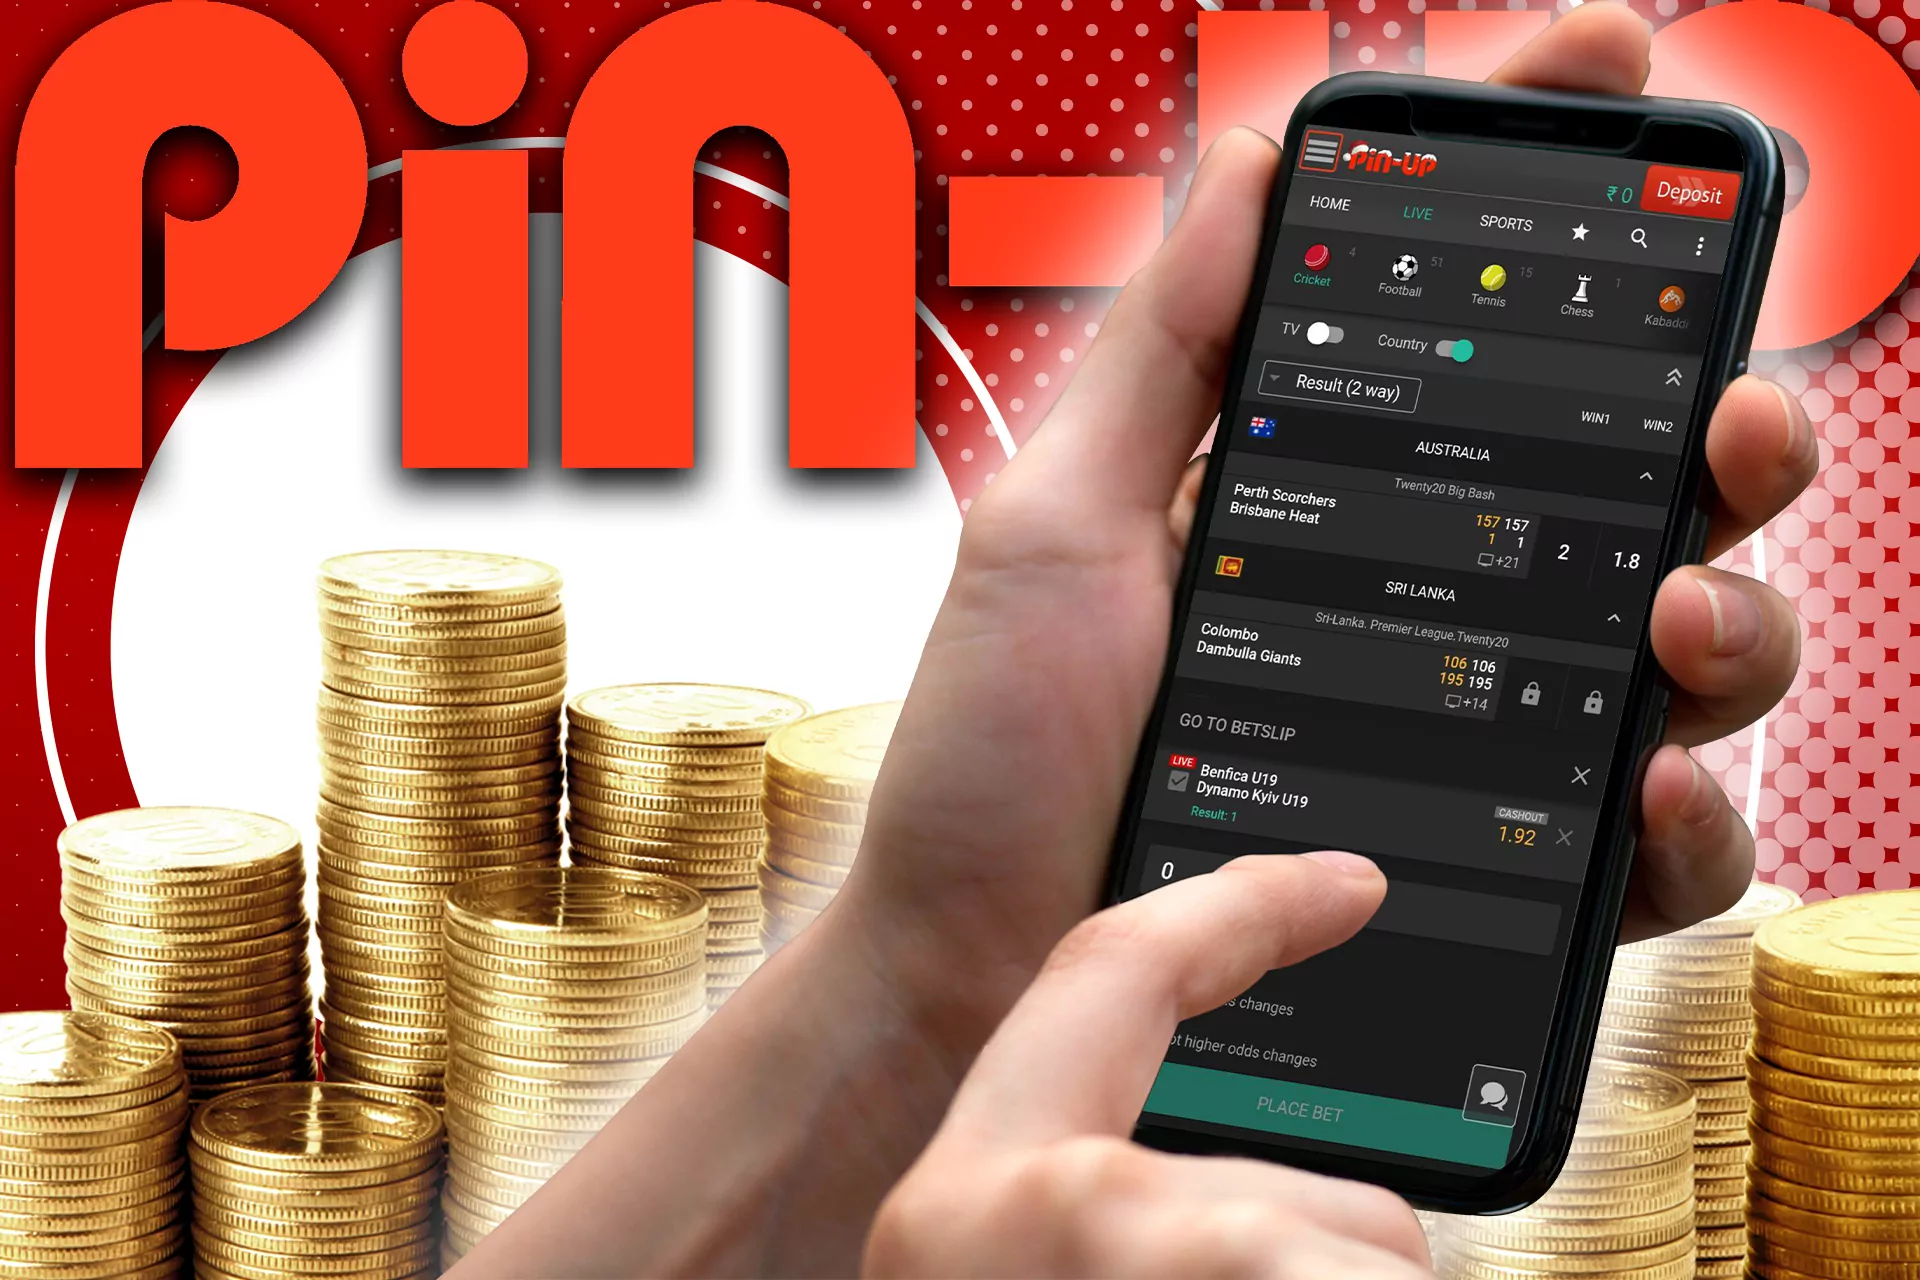 There are a few simple steps to place bet in the app.